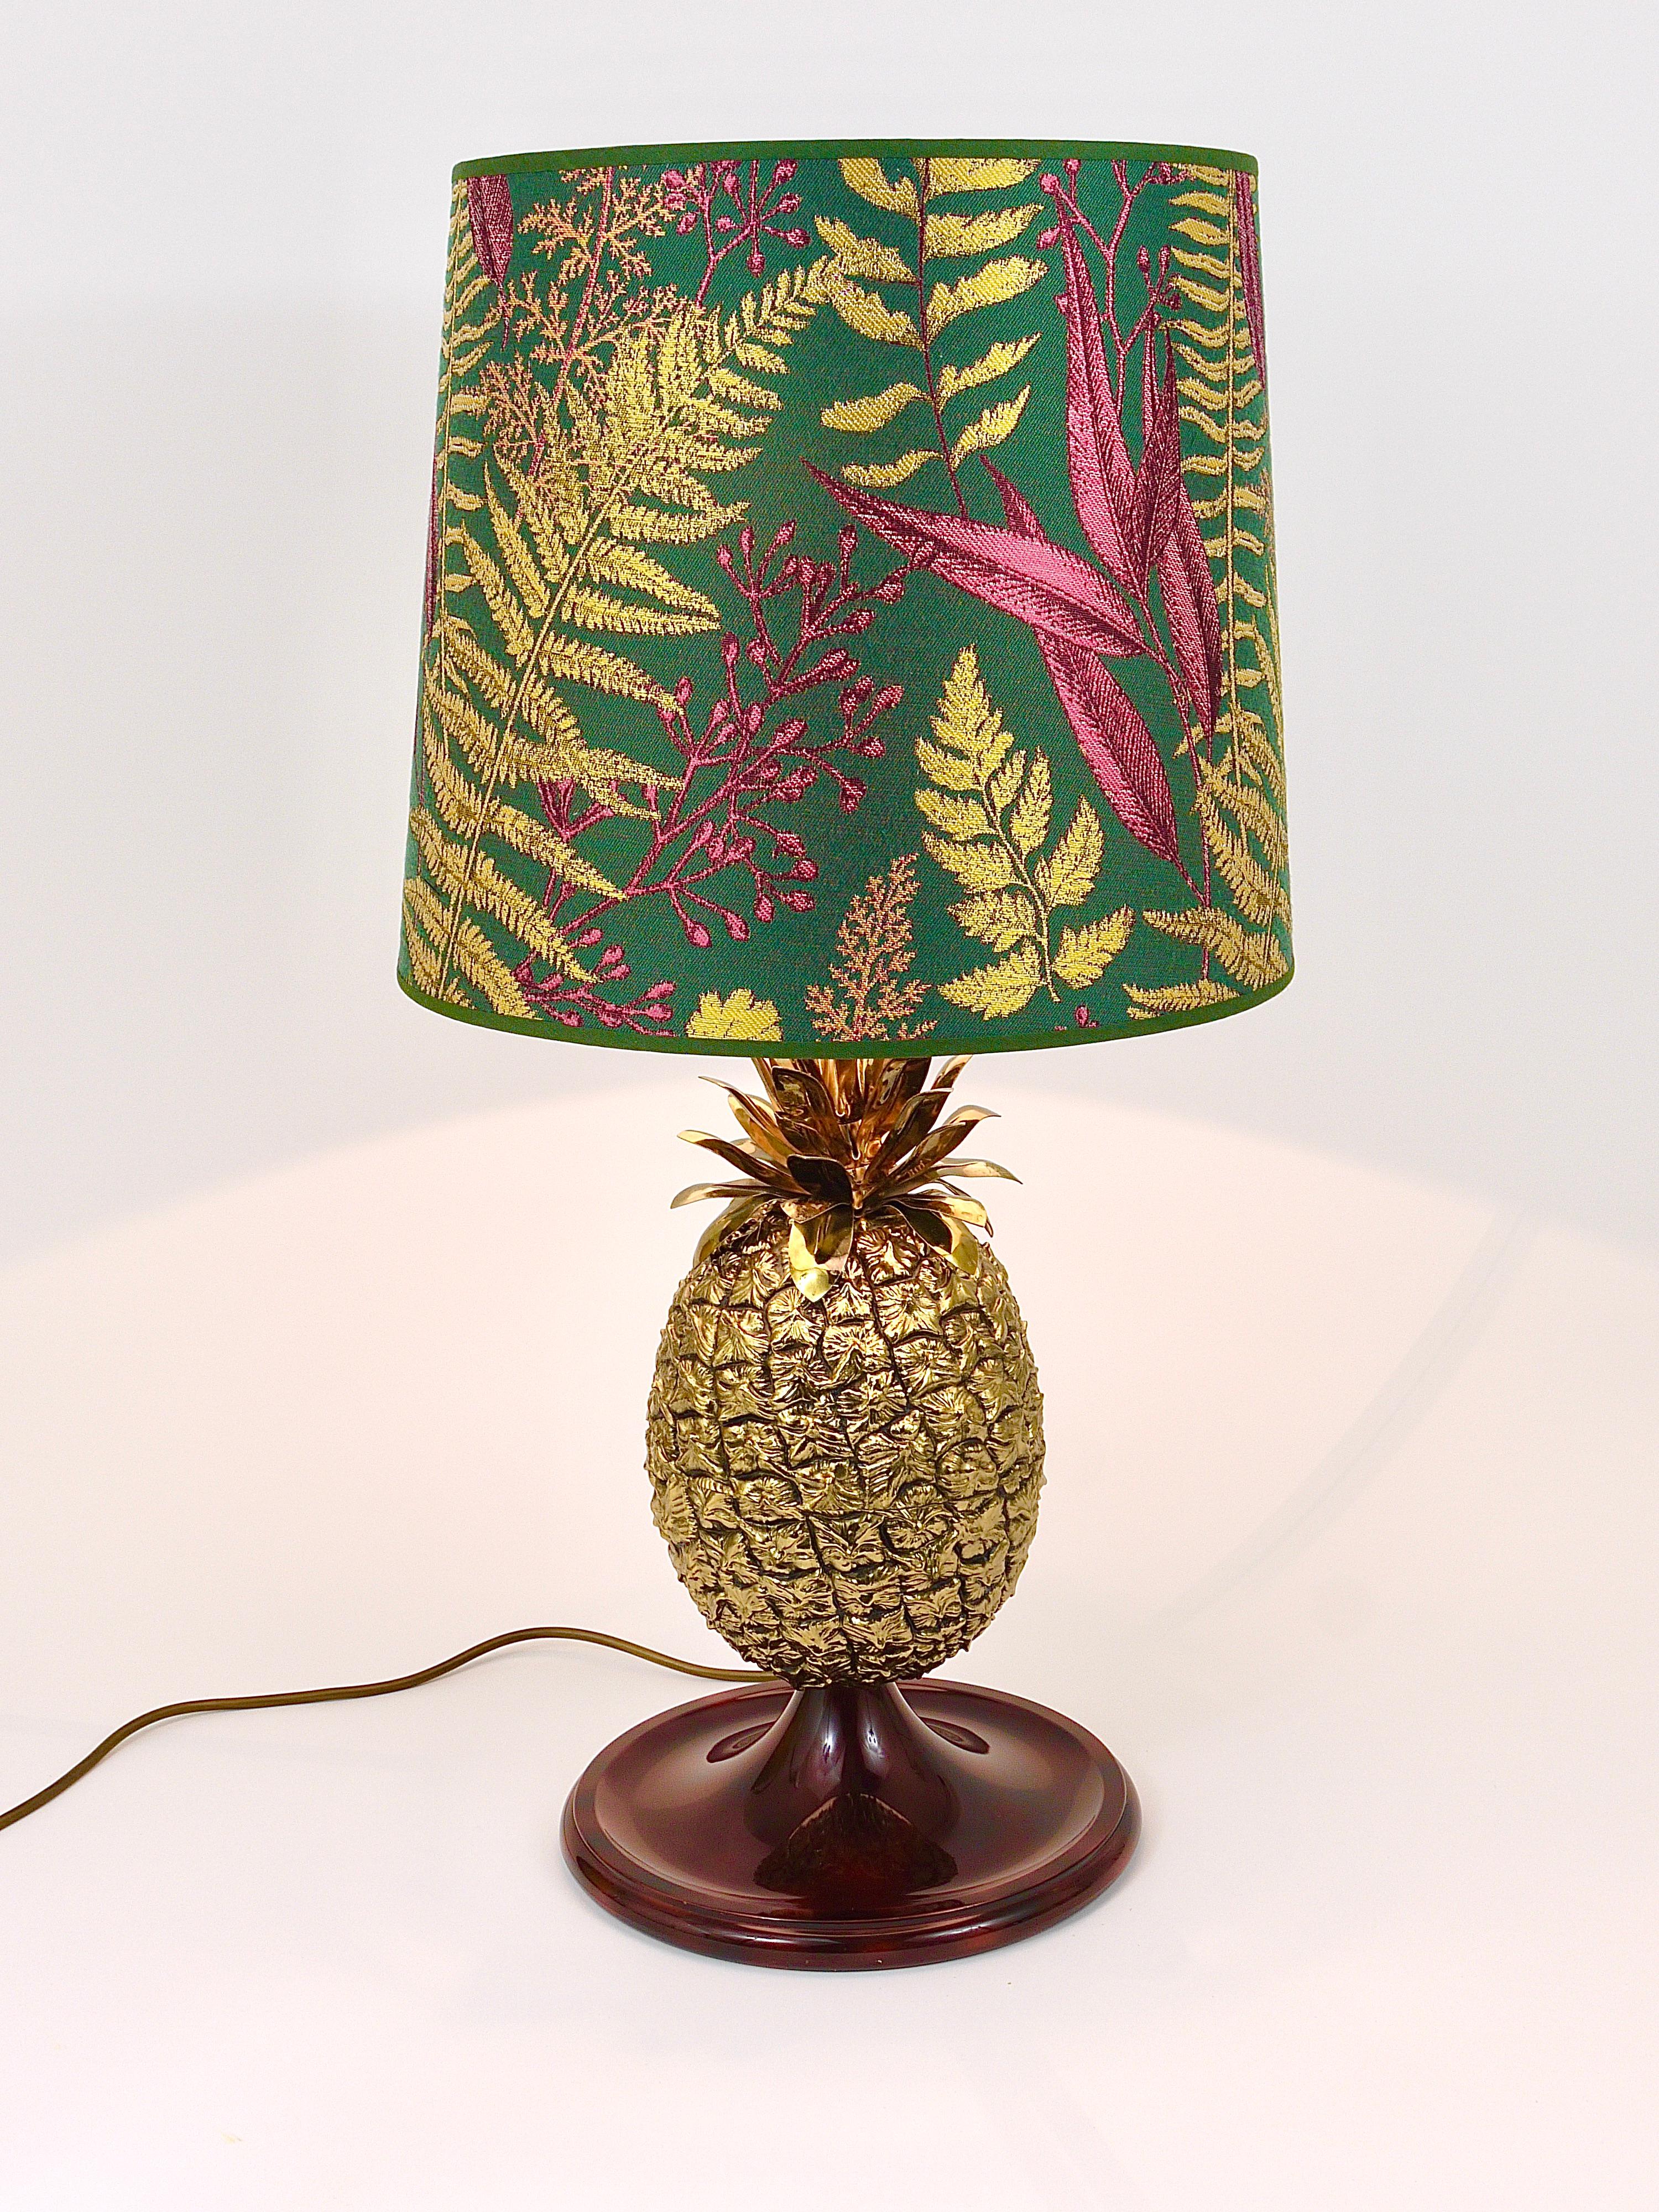 A sculptural golden Hollywood Regency Riviera pineapple table or side lamp by Mauro Manetti from the 1970s. Made of brass and acrylic material with a nice tortoise colored tulip base. Comes with a professionally refurbished lampshade, covered with a